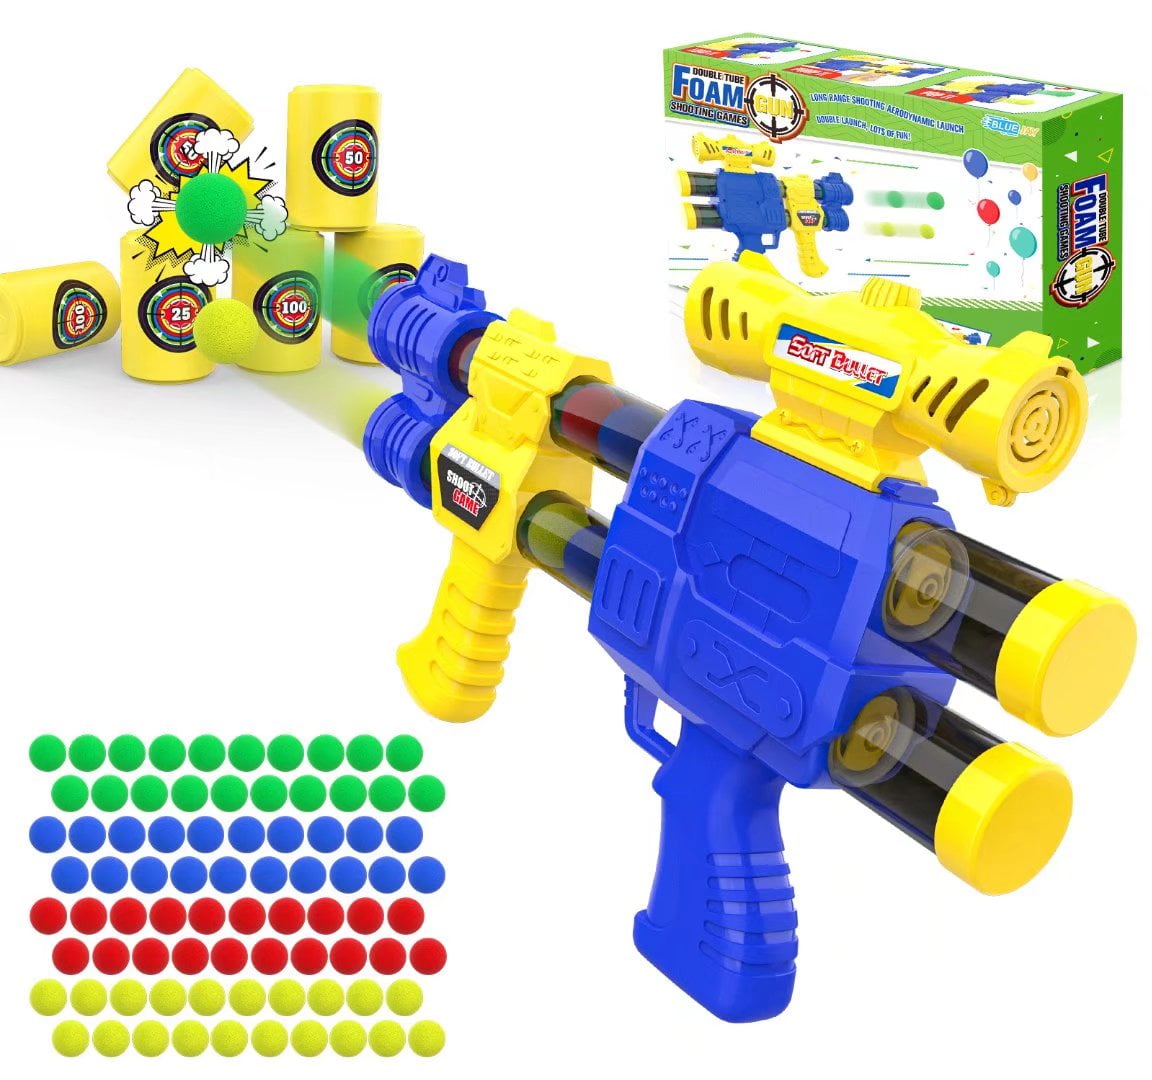 Growsly Childrens Gun Toys with 80 PCs Colorful Soft Foam Ball Xmas Gift for 5-12 Years Old BoyandGirl, Blue and Yellow